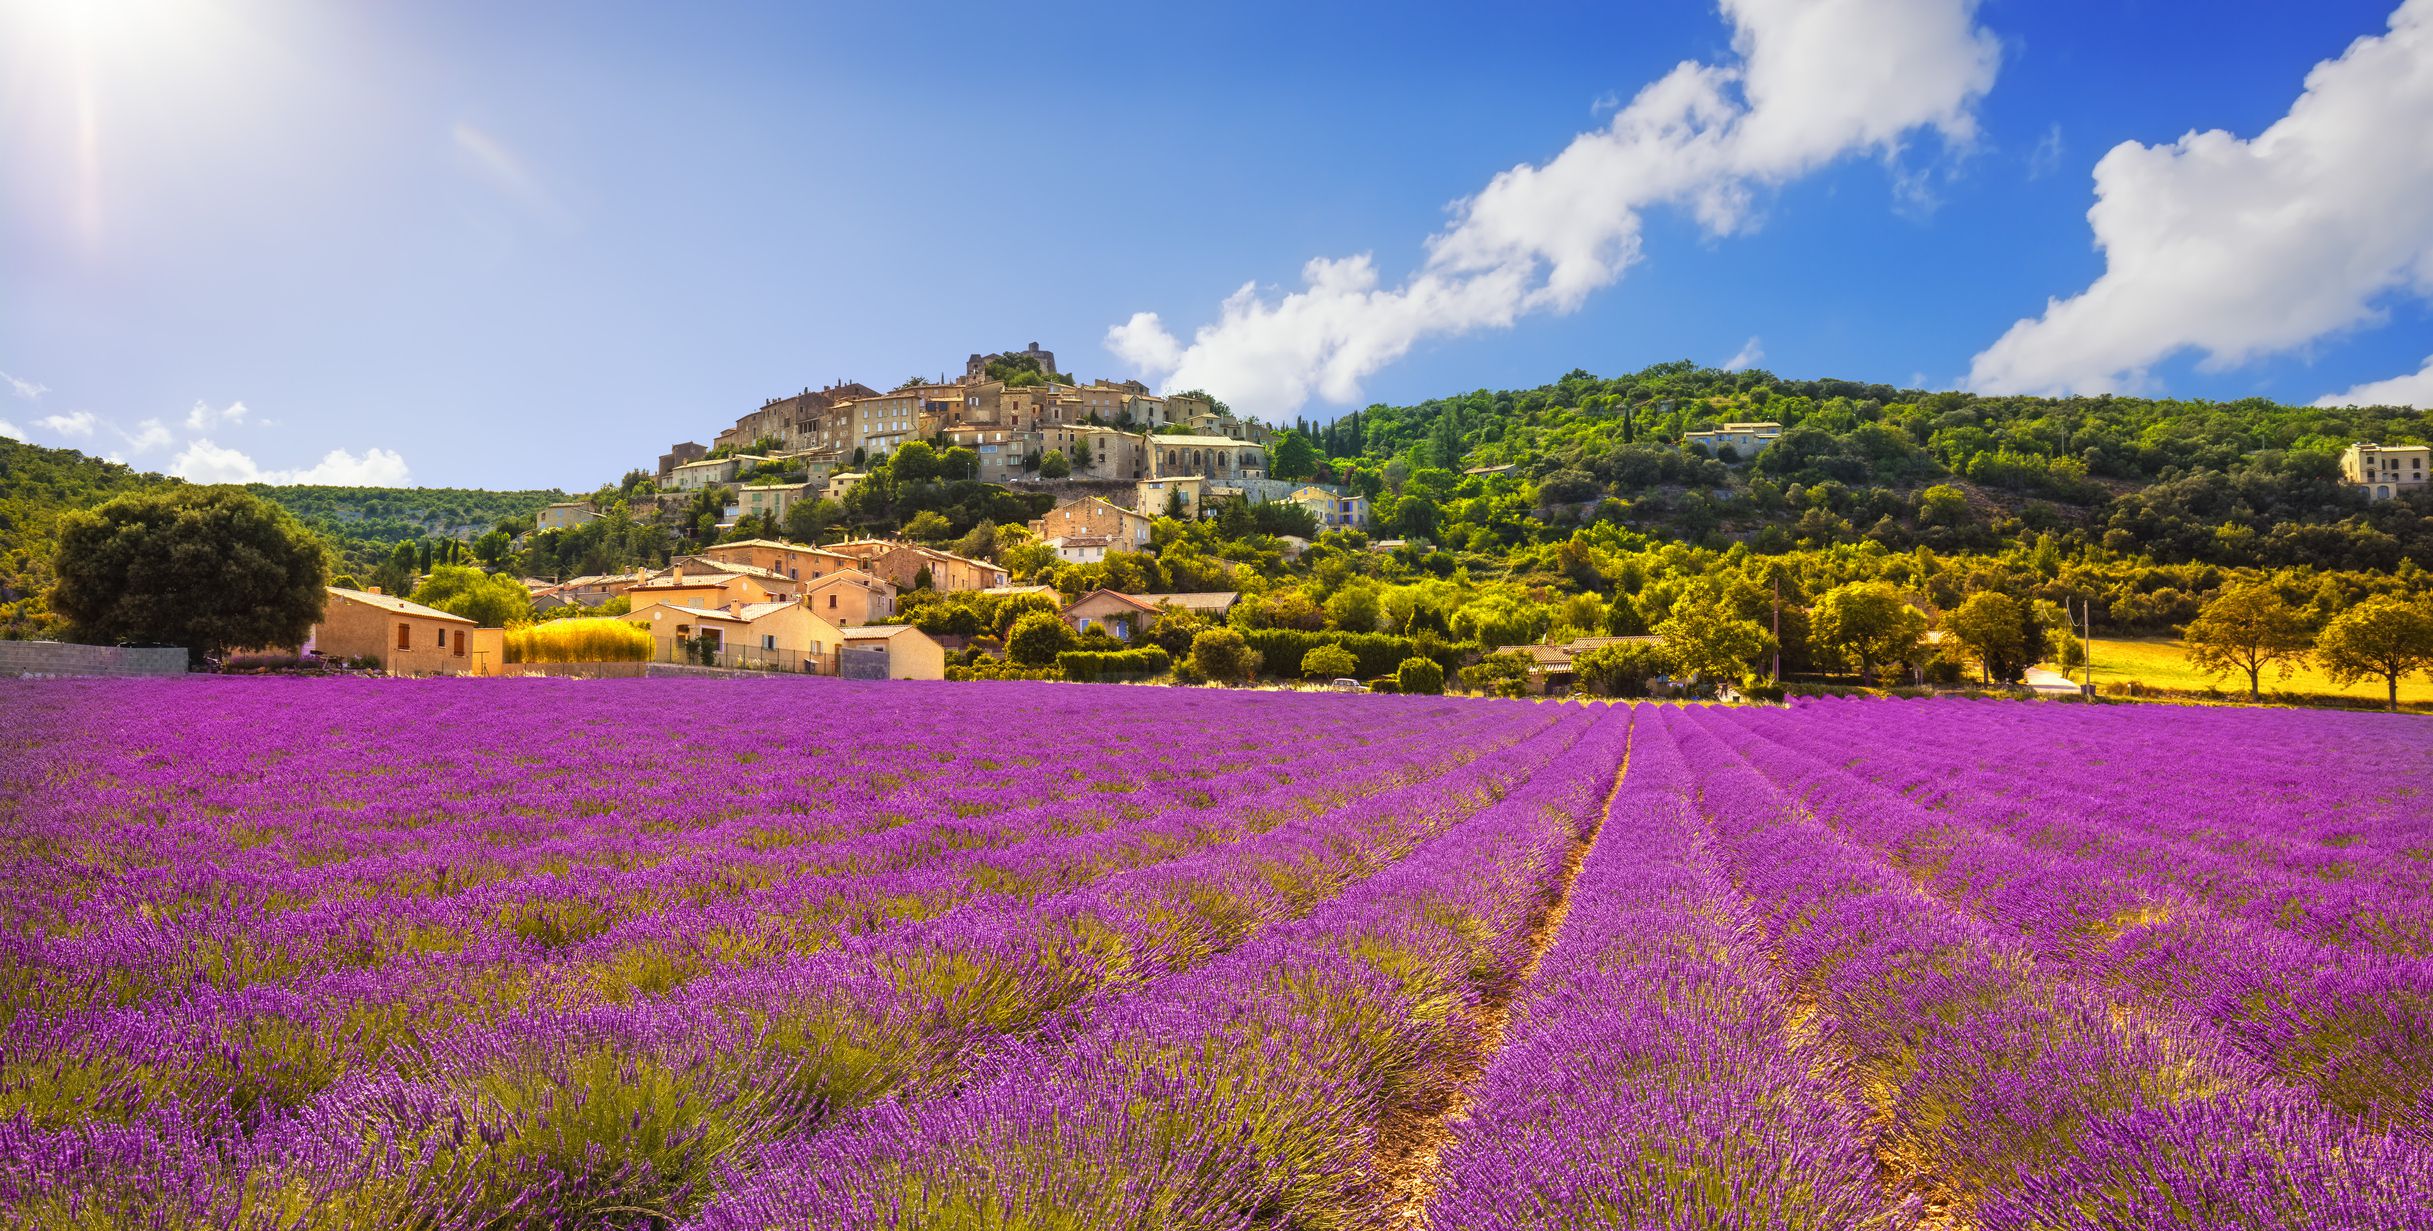 <p>Fairytale chateaus, rolling hills covered in lavender, beautiful mountain views, and one of the best cuisines on the planet…Provence is the perfect location for a small destination wedding. With a lovely Mediterranean climate to boot, you can plan a truly special, intimate affair in the south of France.</p><h3>What to do in Provence</h3><p>If you have time, a visit to the magnificent walled city of Avignon is one of the best things to do while in Provence. Home to popes for centuries during medieval conflicts, the Pope’s Palace is a fascinating experience for history lovers and architecture fans alike.</p><h3>Where to eat in Provence</h3><p>Provence is one of the food capitals of the world, so almost anywhere you head you’ll find amazing cuisine and fantastic eateries. However, it would be foolish not to try two amazing Provencal ingredients, saffron, and truffles, and probably the best spot to do so is at L'Oustalet, a romantic one-room dining room in the hillside wine village of Gigondas, described by those in the know as the best restaurant in the region. </p>